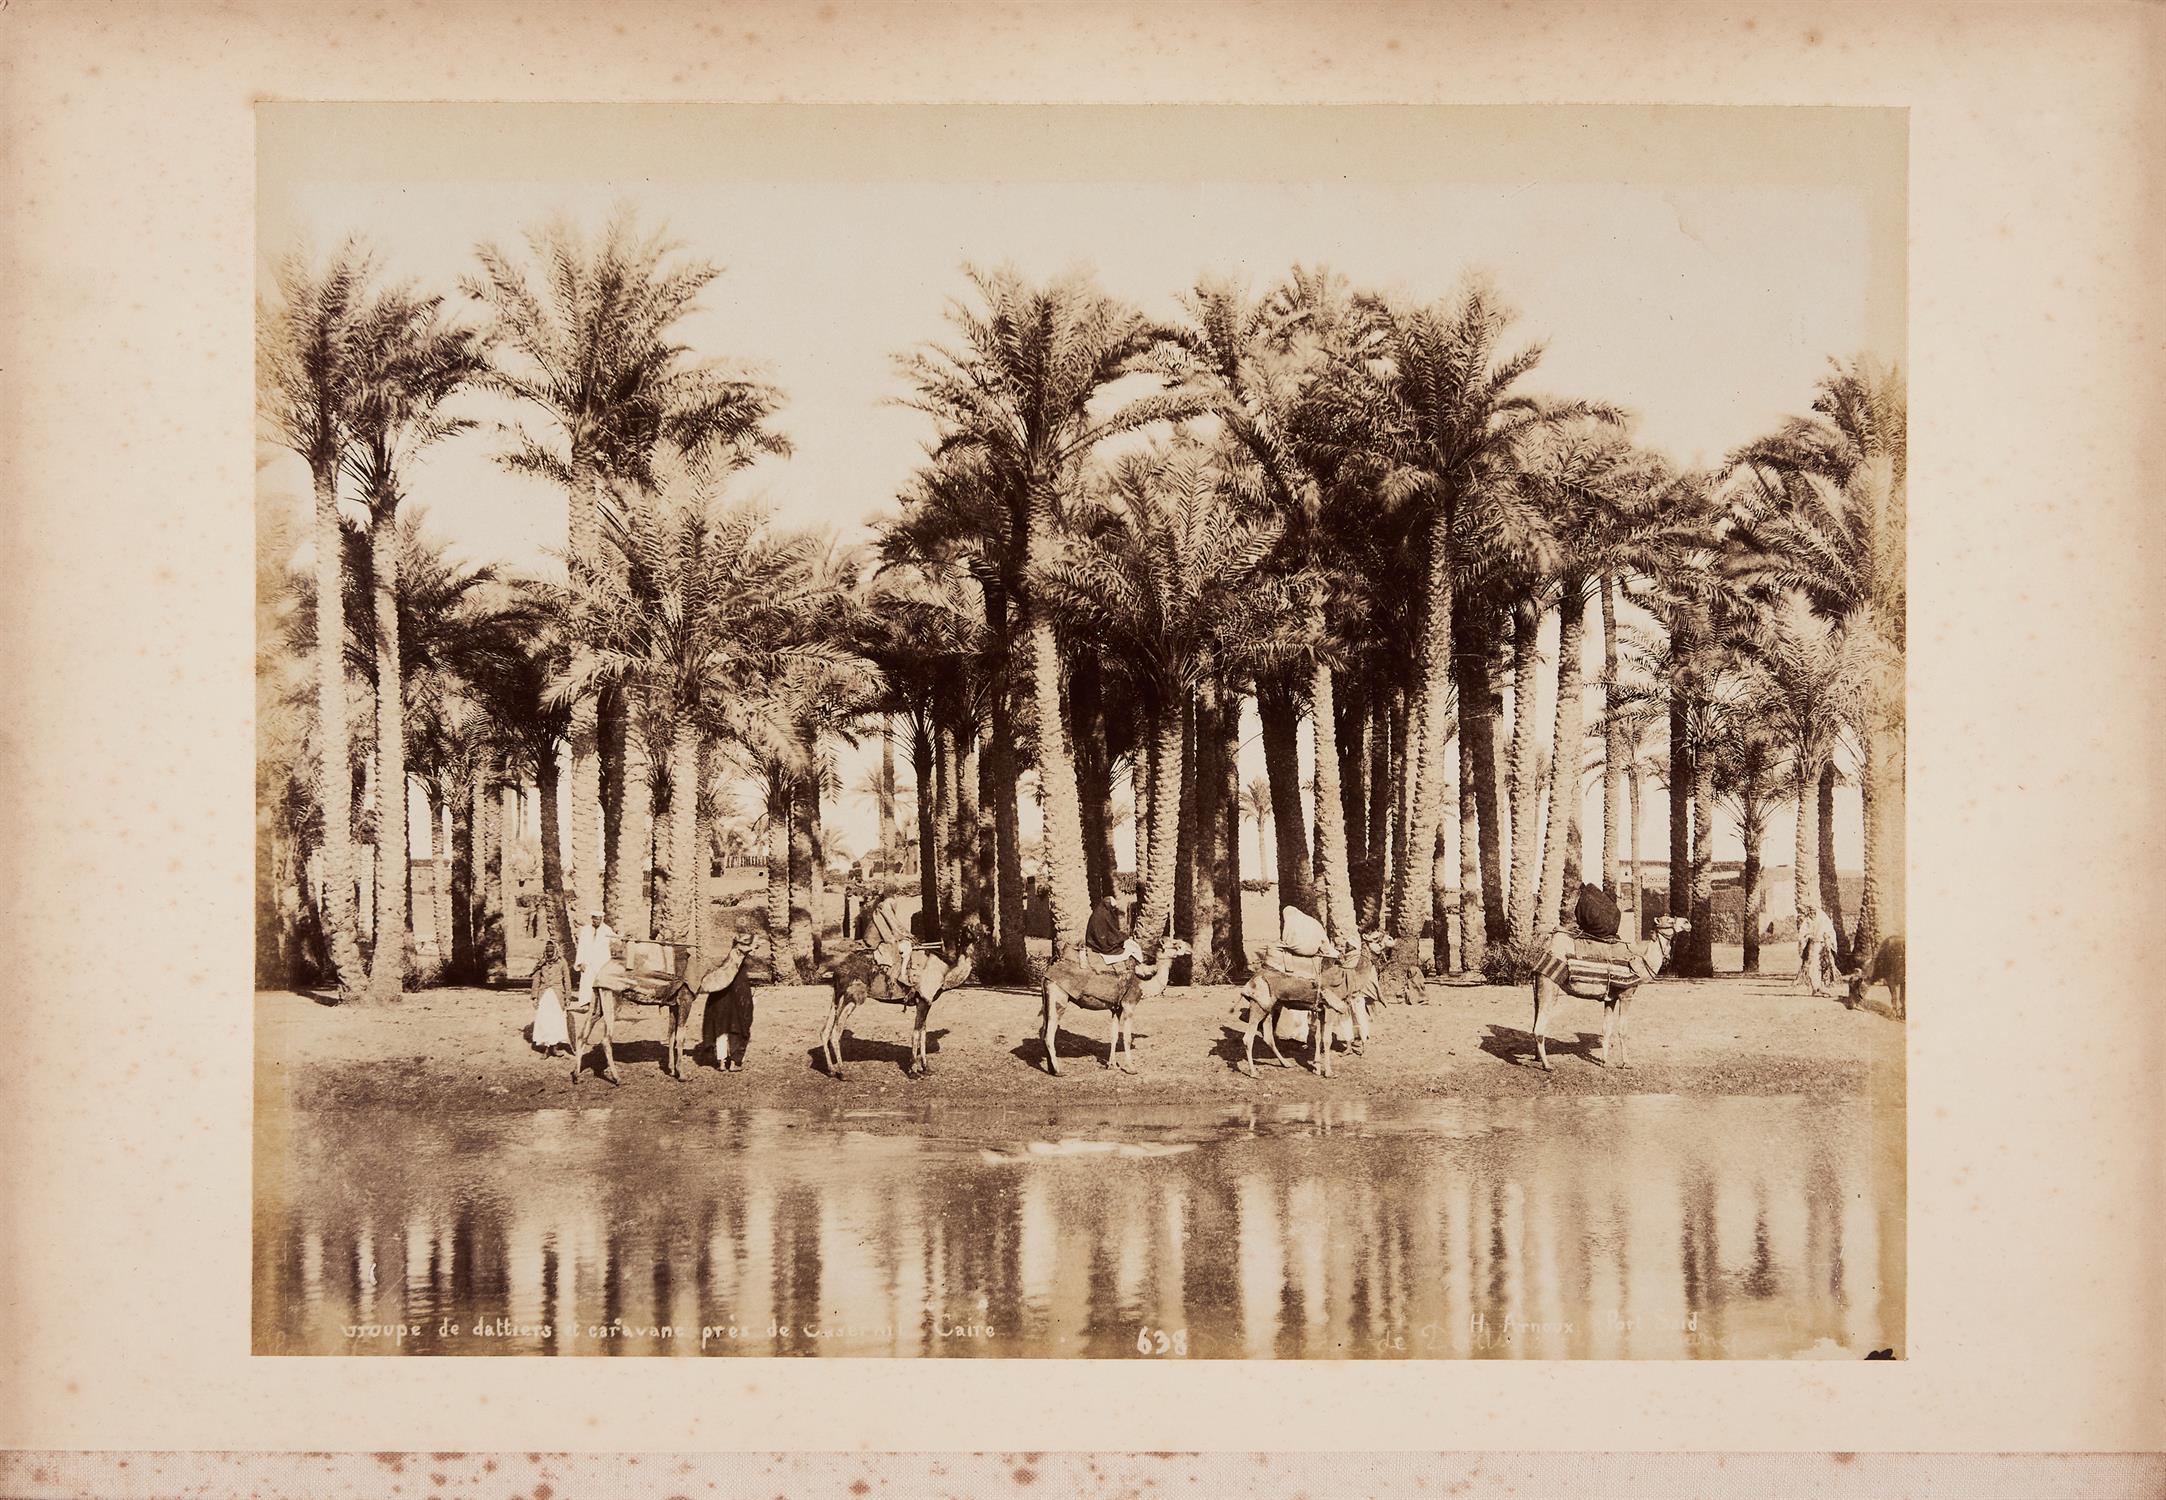 Ɵ Egypt, Damascus and the Holy Lands, by Arnoux, Bonfils and Zangaki [various, c. 1880-1900] - Image 5 of 8